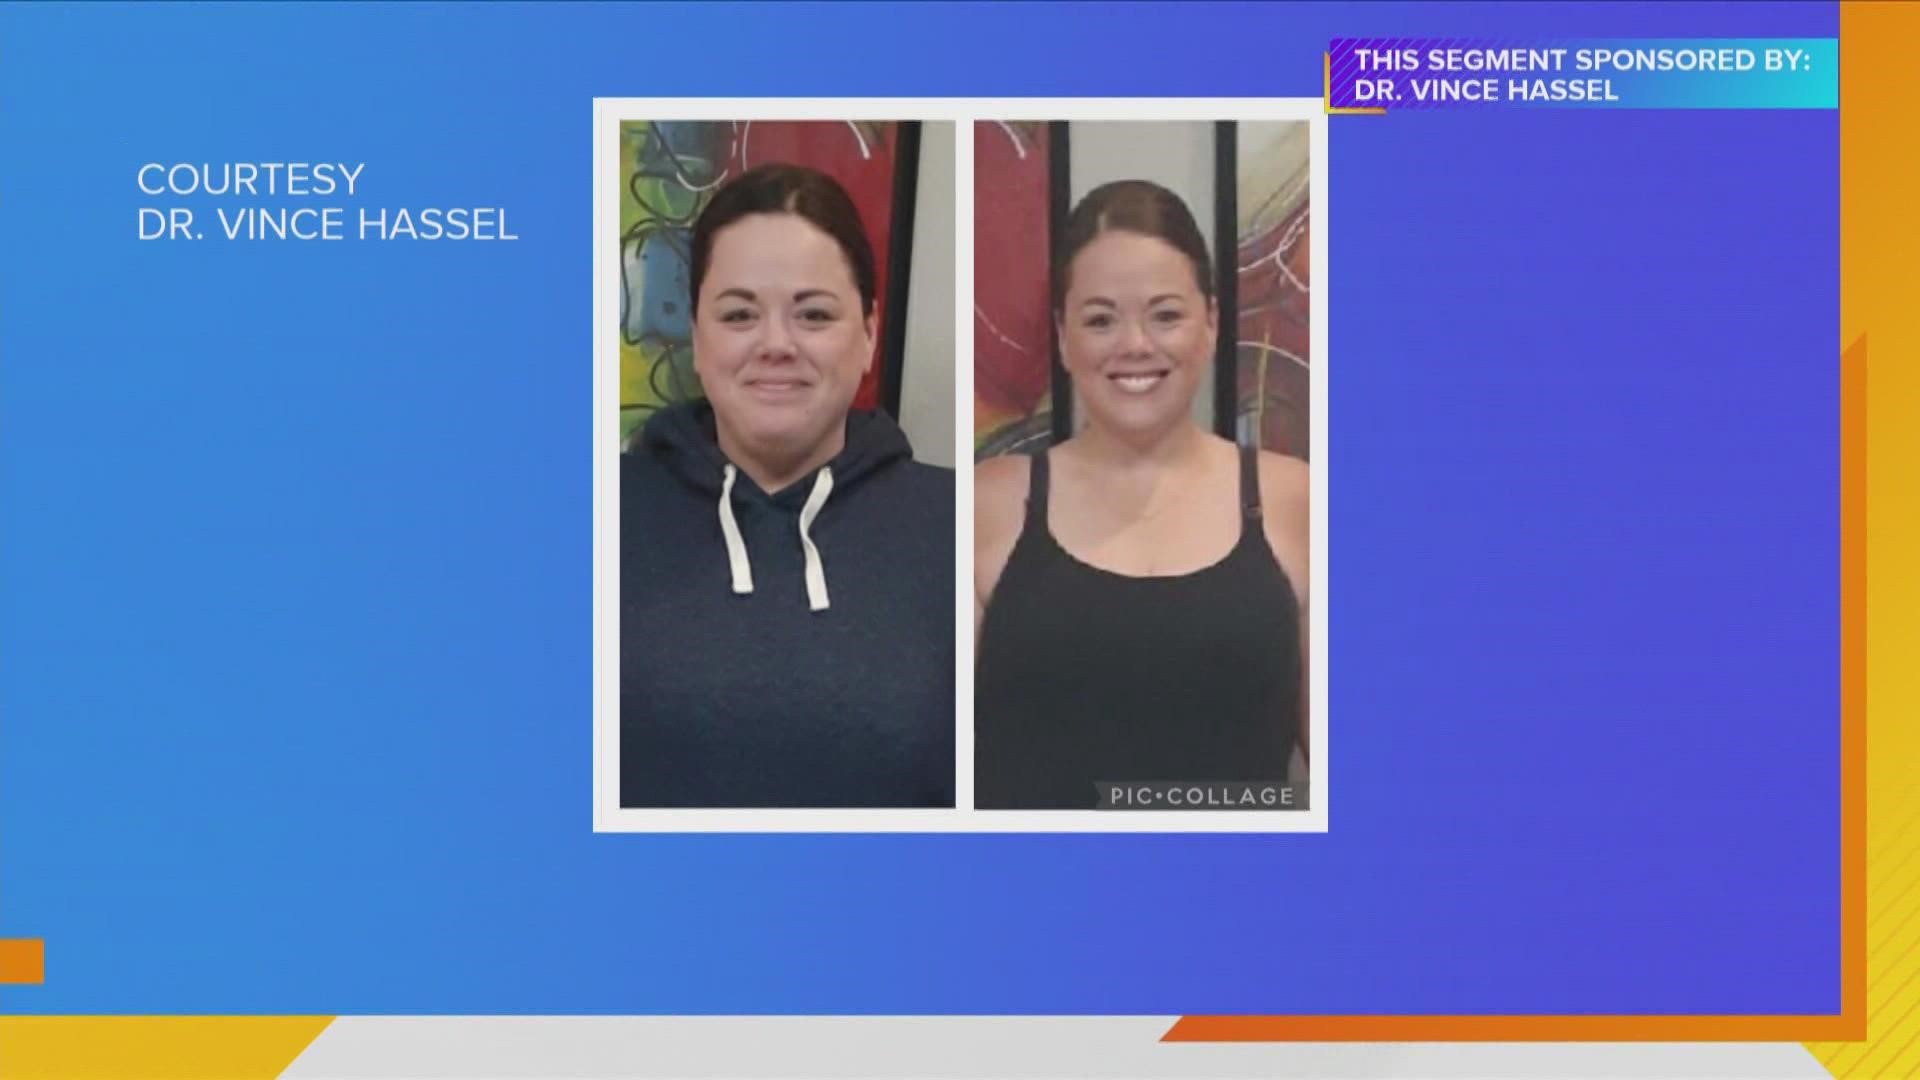 Danielle Holt lost 53 pounds with two rounds of Dr. Vince Hassel's ChiroThin Weight Loss Program | Paid Content